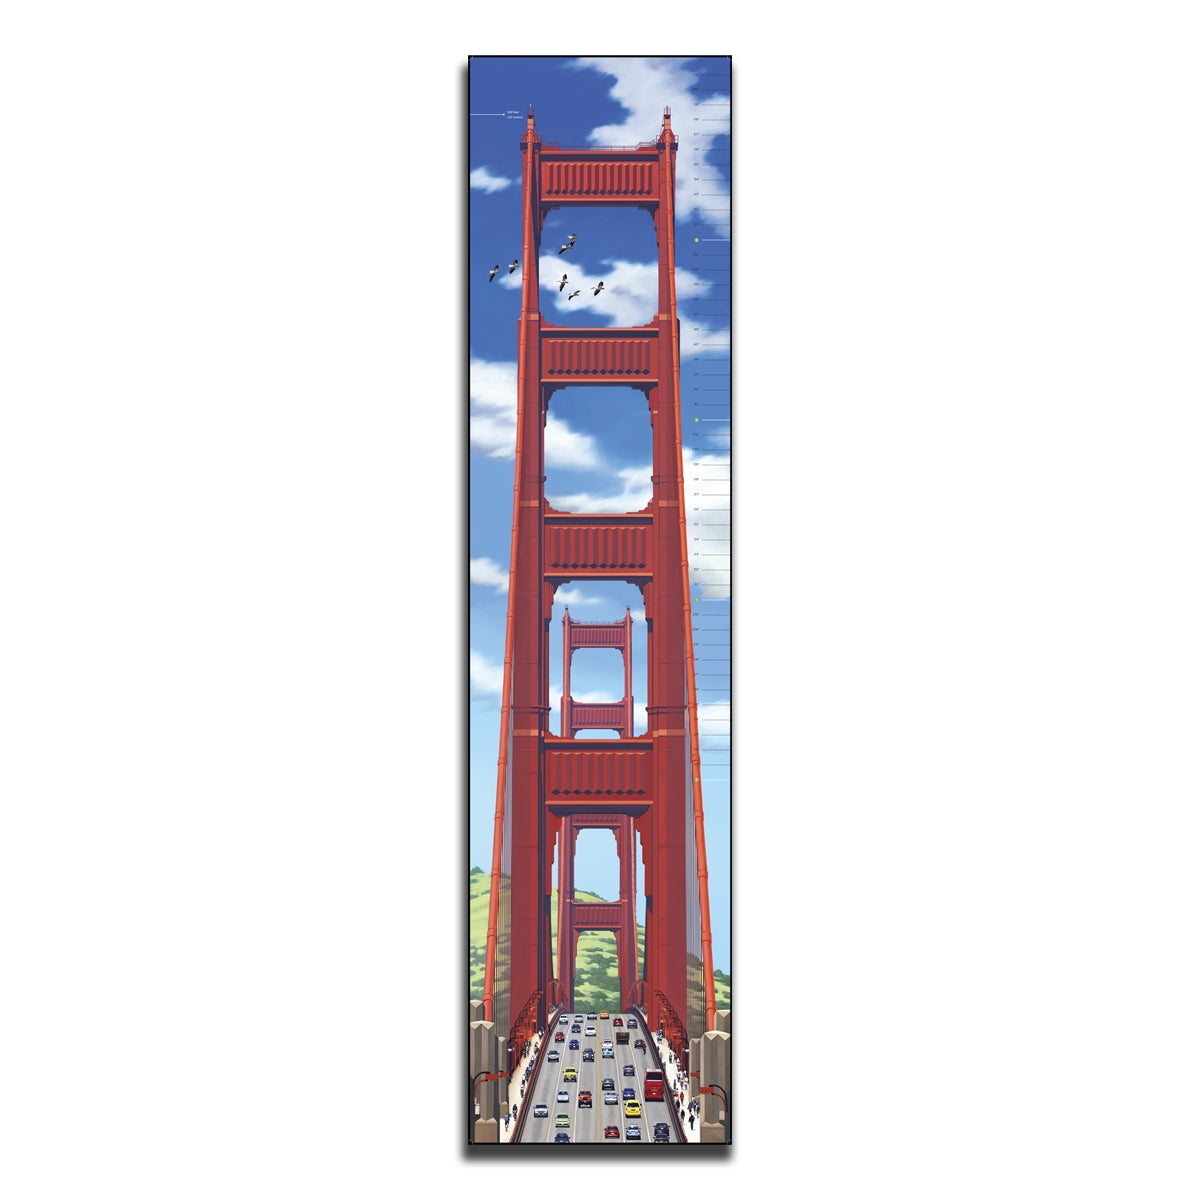 6-foot tall Golden Gate Bridge growth chart, with colorful illustrations of San Francisco's famous landmark.